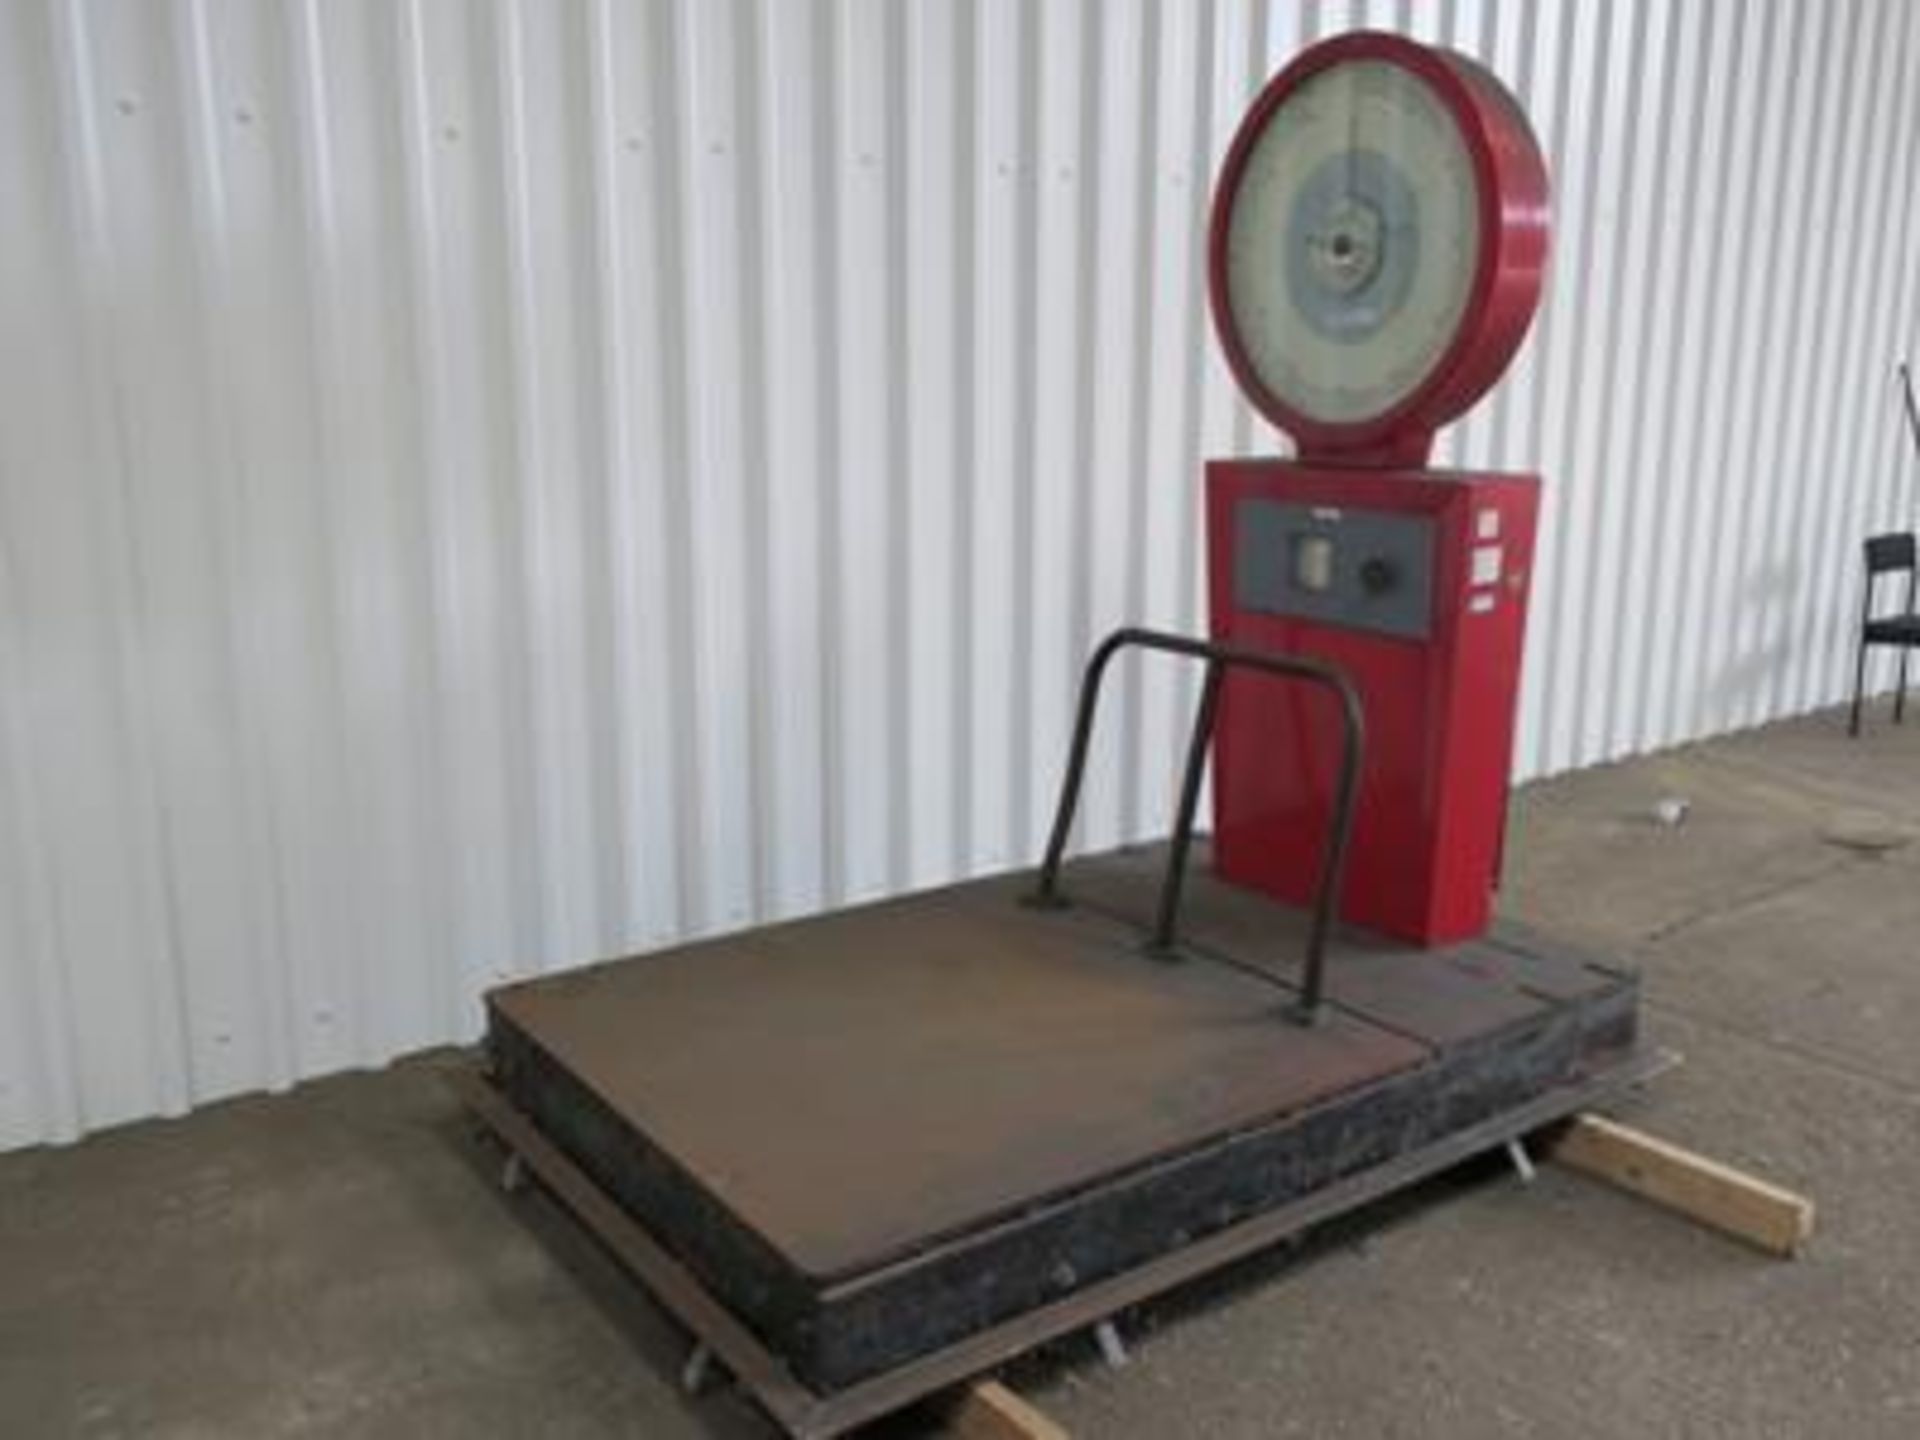 * Heavy duty Weighing Scale made by Todd Scales Ltd, Class 3 S/N 92056 cert no 948, Max 500Kg min